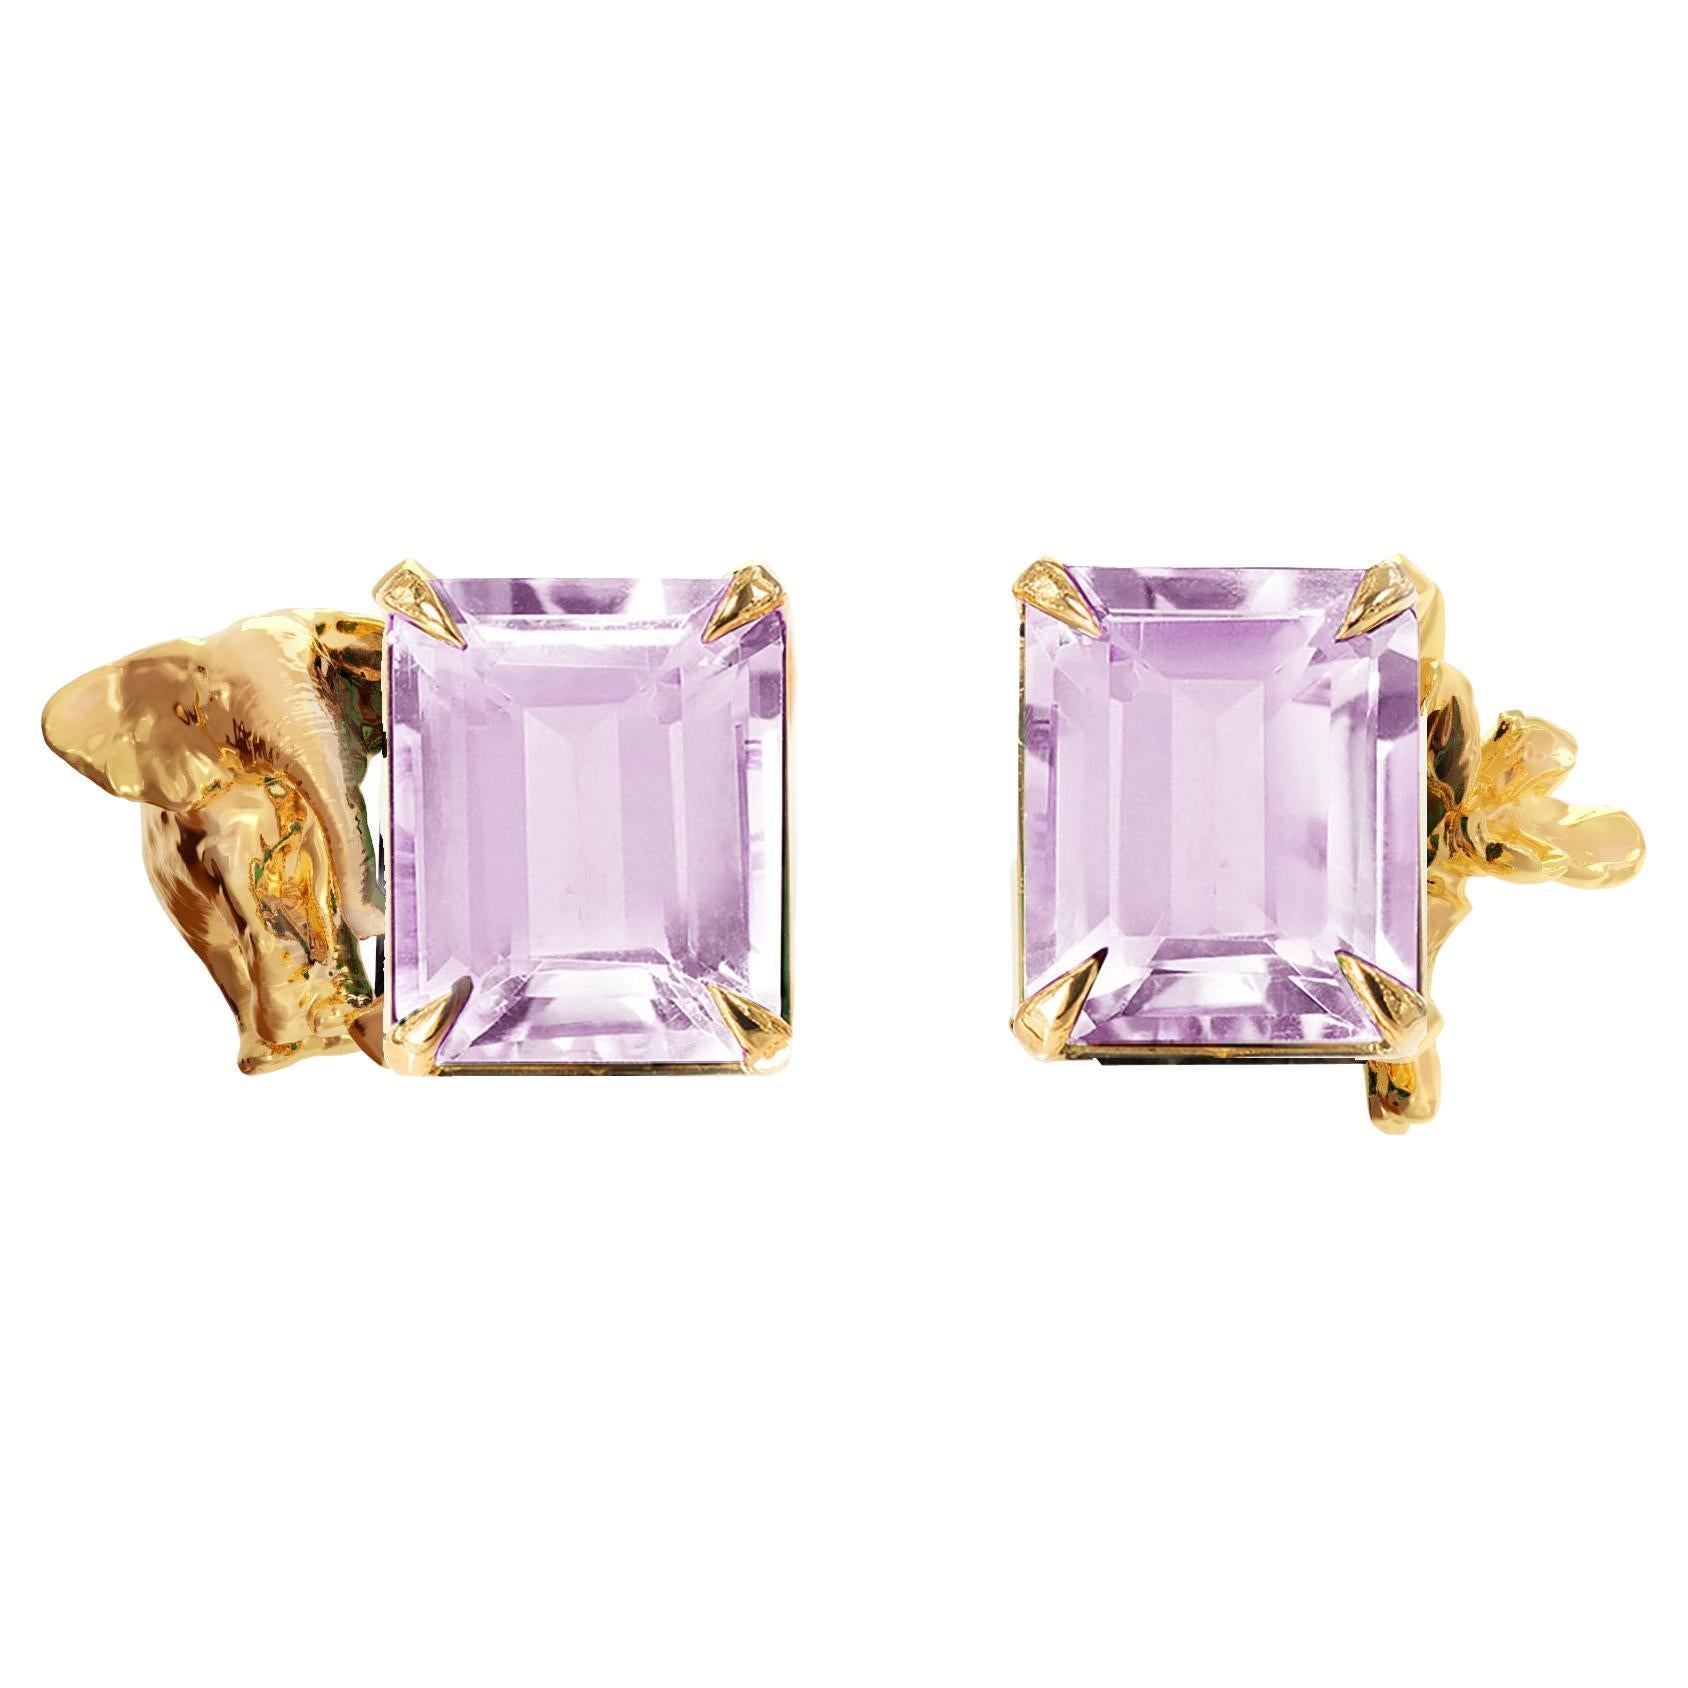 Eighteen Karat Yellow Gold Contemporary Stud Earrings with Amethysts